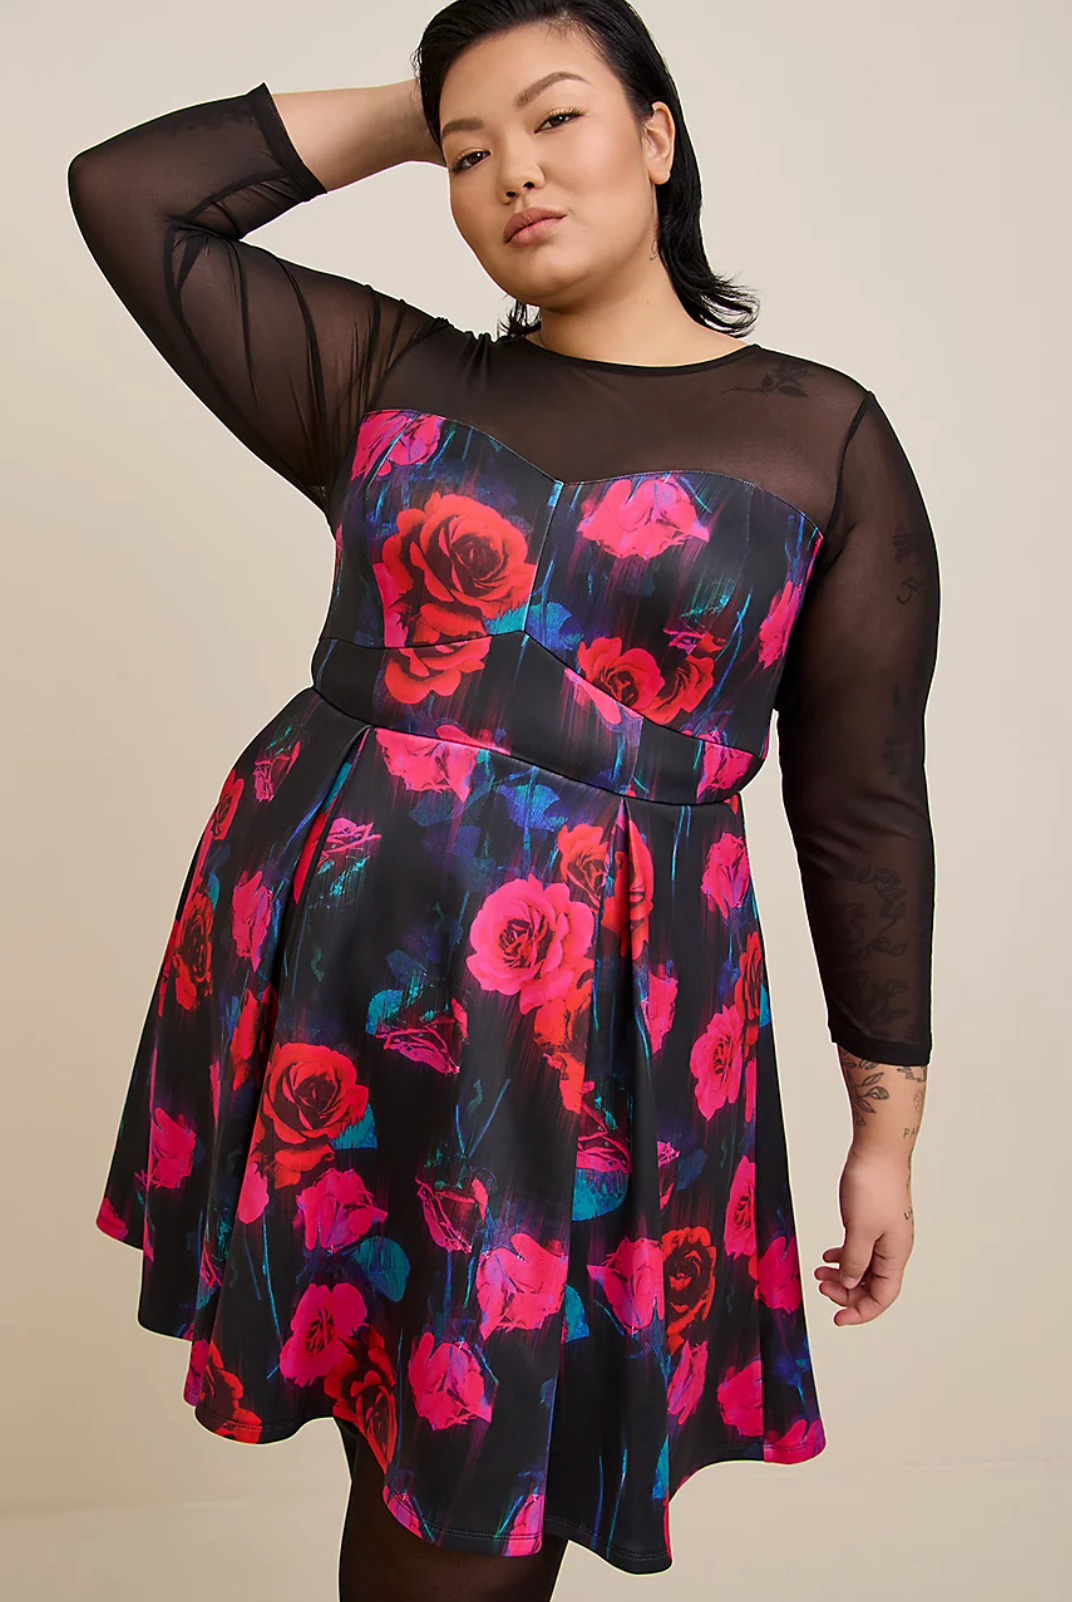 A model wearing the dress with a rose design and black mesh sleeves